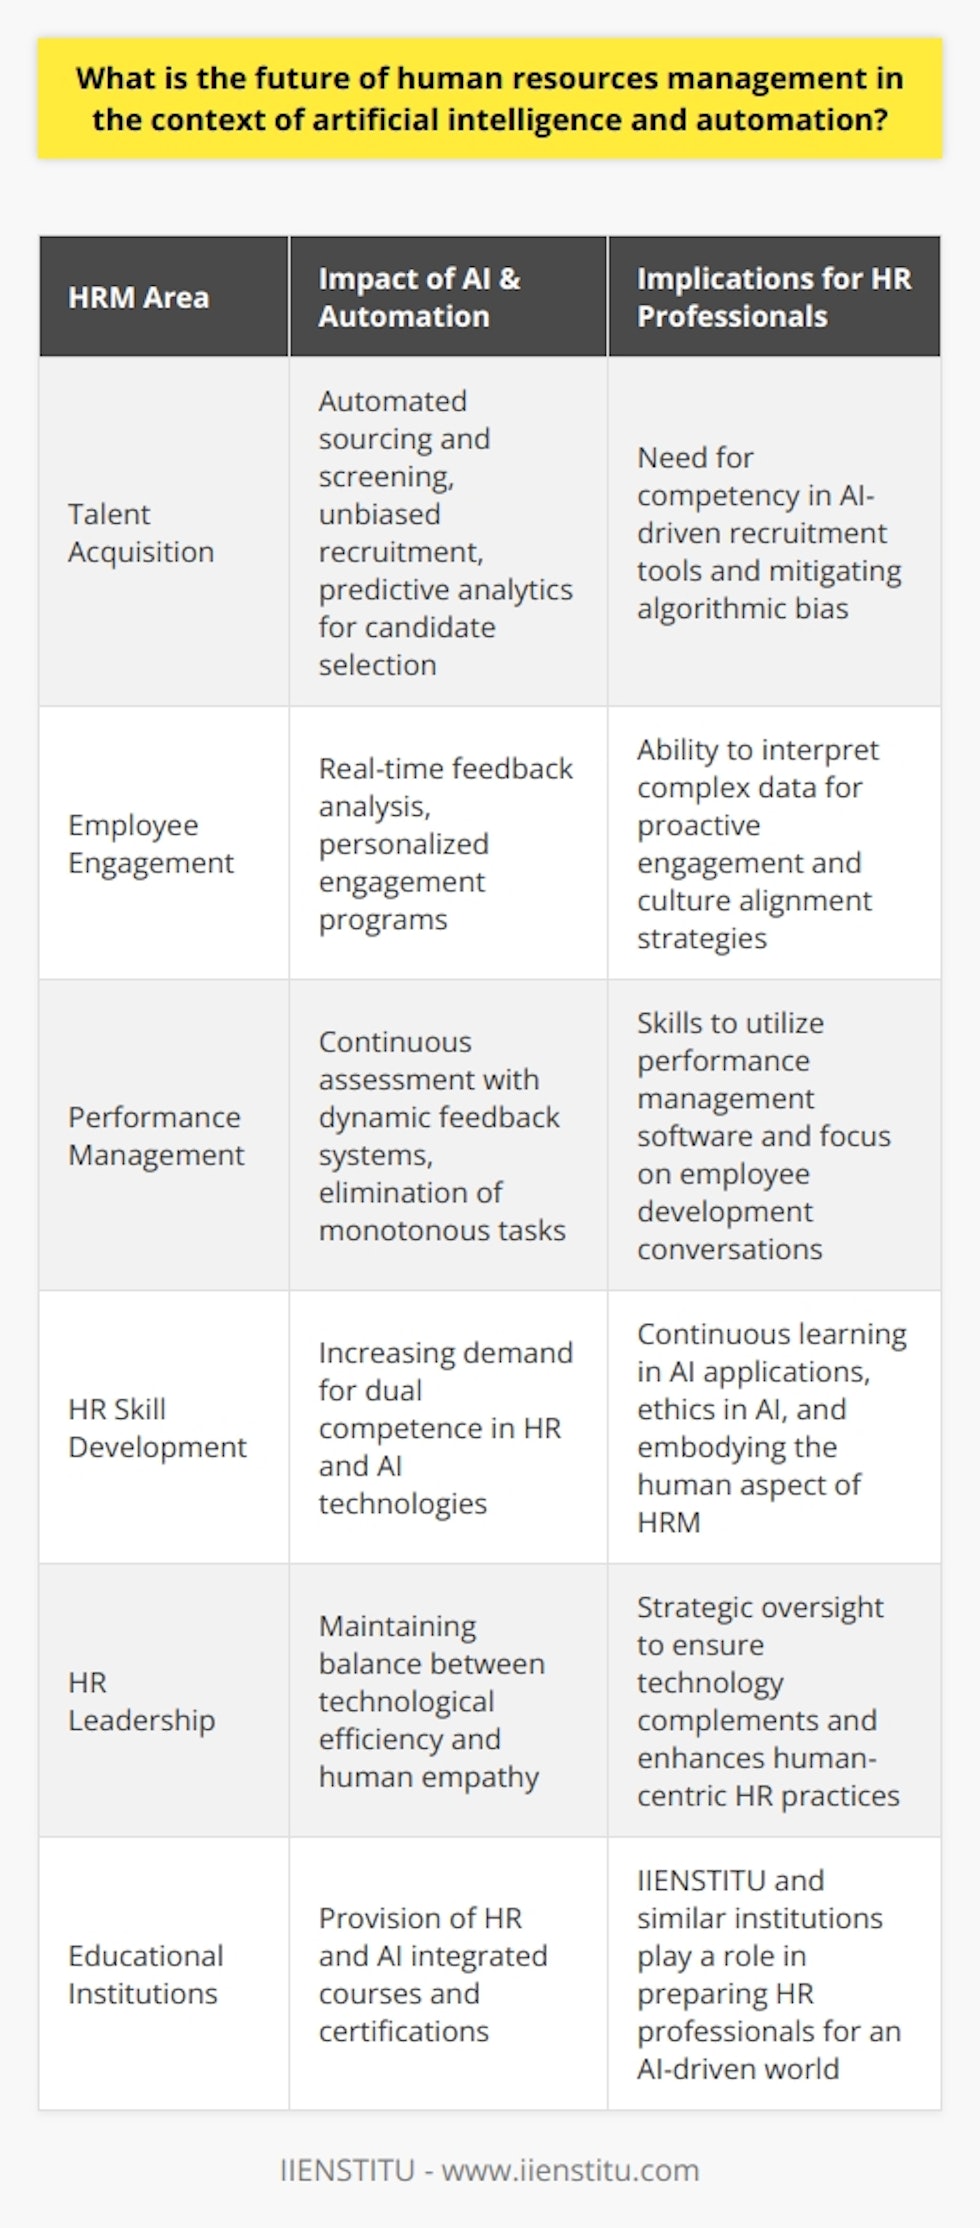 The advent of artificial intelligence (AI) and automation is shaping the landscape of human resources management (HRM) by offering innovative tools to tackle routine tasks, analyze vast data sets, and make evidence-based strategic decisions. As organizations embrace digital transformation, HR professionals are leveraging these technologies to recruit top talent, enhance employee experiences, and improve performance management.In talent acquisition, AI is already revolutionizing the recruitment process by powering platforms that streamline candidate sourcing, automate initial screening of resumes, and schedule interviews. This not only expedites the hiring process but also helps reduce unconscious biases, thereby fostering a more diverse and inclusive workforce. Moreover, predictive analytics are increasingly being used to identify the skills and attributes of high-performing individuals, thus refining the search for candidates who are the best fit for an organization’s culture and needs.Employee engagement is another domain where AI is making a significant impact. AI tools can analyze employee feedback in real time, enabling managers to quickly address concerns and bolster morale. Customized engagement programs, driven by insights gleaned from AI, support individual career paths and contribute to higher levels of staff loyalty. Through this, companies are not only able to retain talent but also to cultivate a workplace culture that aligns with their strategic objectives.Performance management systems are also undergoing a transformation due to automation. With sophisticated tools to monitor performance indicators and provide ongoing feedback, the future of HRM is shifting towards more dynamic, continuous approaches to performance assessment. The use of AI helps eliminate the monotony of form-filling and frees up HR professionals to engage in deeper, more meaningful discussions about employee development and growth.However, as AI and automation become integral to HRM, the demand for new skills among HR professionals grows. There is a pressing need for them to become adept at managing AI tools, interpreting complex data sets, understanding the ethical considerations surrounding the deployment of such technologies, and ensuring that AI algorithms are free from biases. Future HR practitioners must develop a dual fluency in technology and human behavioral insights to remain effective.It is crucial to note that despite these technological advancements, the essence of HRM remains unchanged: the focus on people. AI and automation are tools to enhance the roles of HR professionals, not replace them. They are designed to magnify the strategic aspect of HR work, allowing professionals to focus on creating stronger bonds with employees and enhancing the human interaction that is so central to successful HRM.Looking ahead, the integration of AI and automation within HRM is inevitable and will bring about a smarter, more agile approach to managing human capital. Nevertheless, it is the responsibility of HR leaders to ensure that the adoption of such technologies complements rather than replaces the human-centric nature of HR. By maintaining the delicate balance between tech efficiency and human empathy, HRM can drive organizations to new heights in this AI-driven era. The role of institutions such as IIENSTITU is paramount in equipping HR professionals with the knowledge and skills needed to navigate the evolving landscape of HRM. Institutions offering courses and certifications that blend HR expertise with AI proficiency will be vital for the development of HRM strategies that harness the power of automation while preserving the irreplaceable human touch.